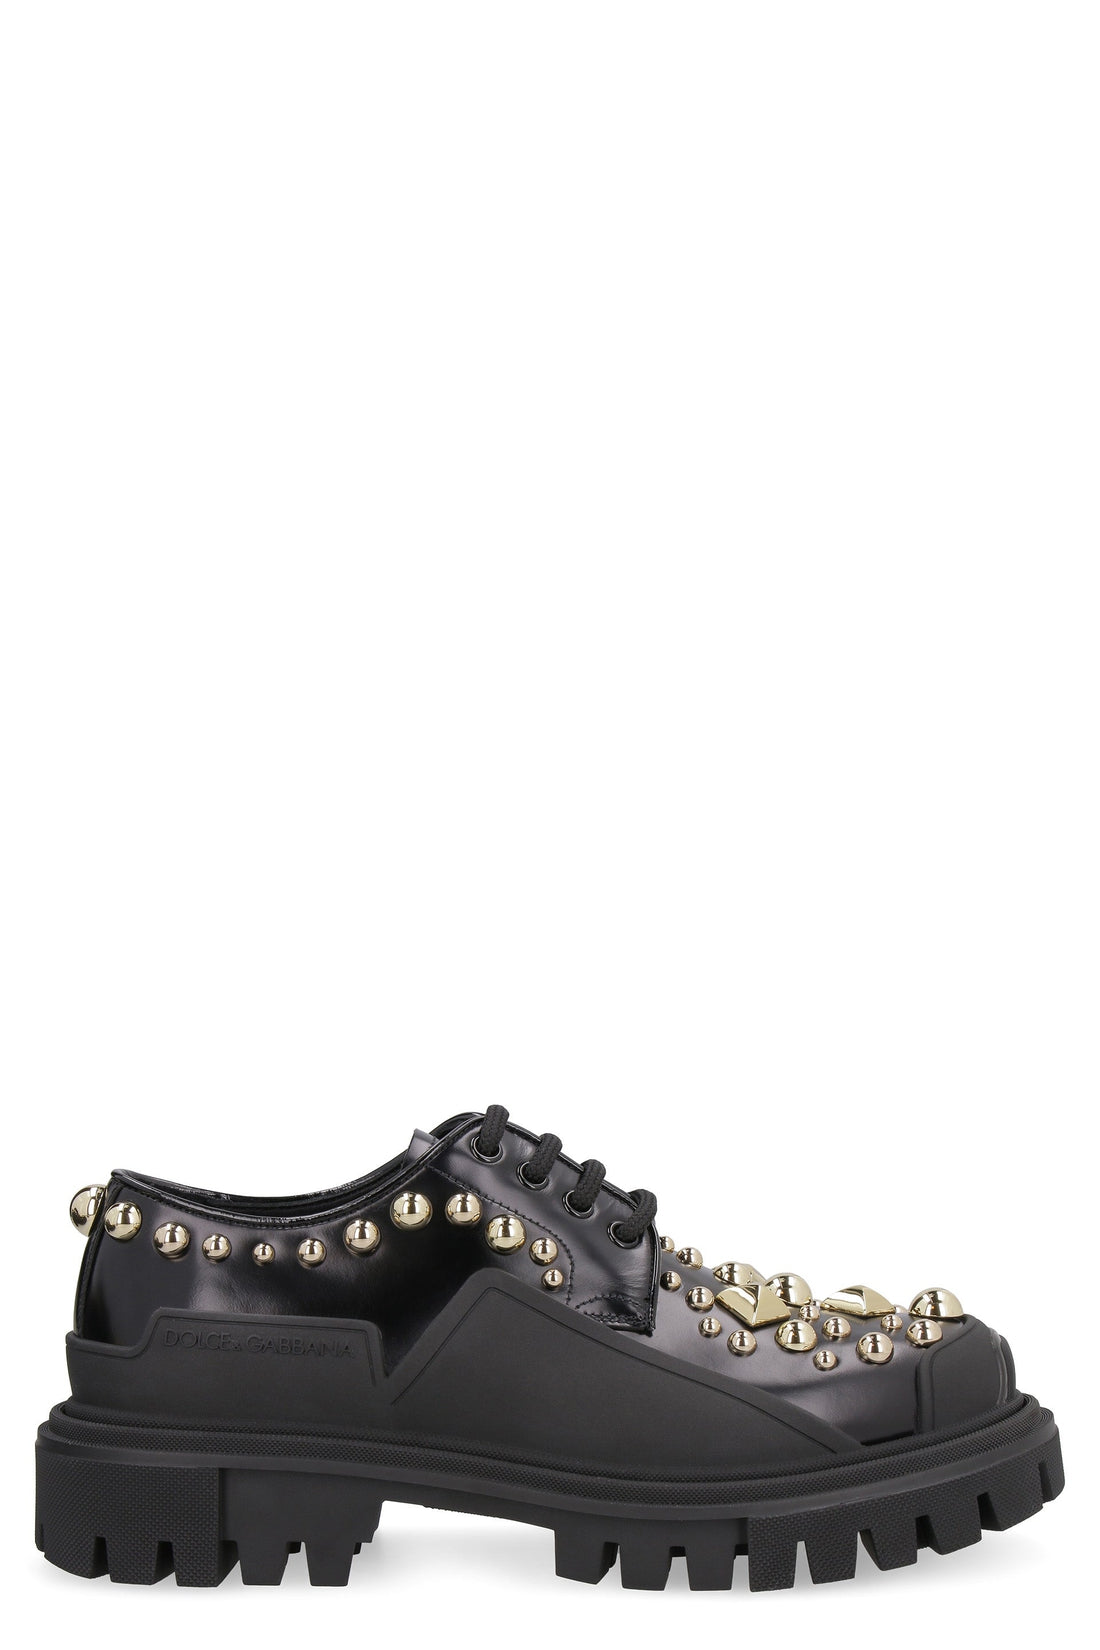 Dolce & Gabbana-OUTLET-SALE-Studded leather lace-up shoes-ARCHIVIST